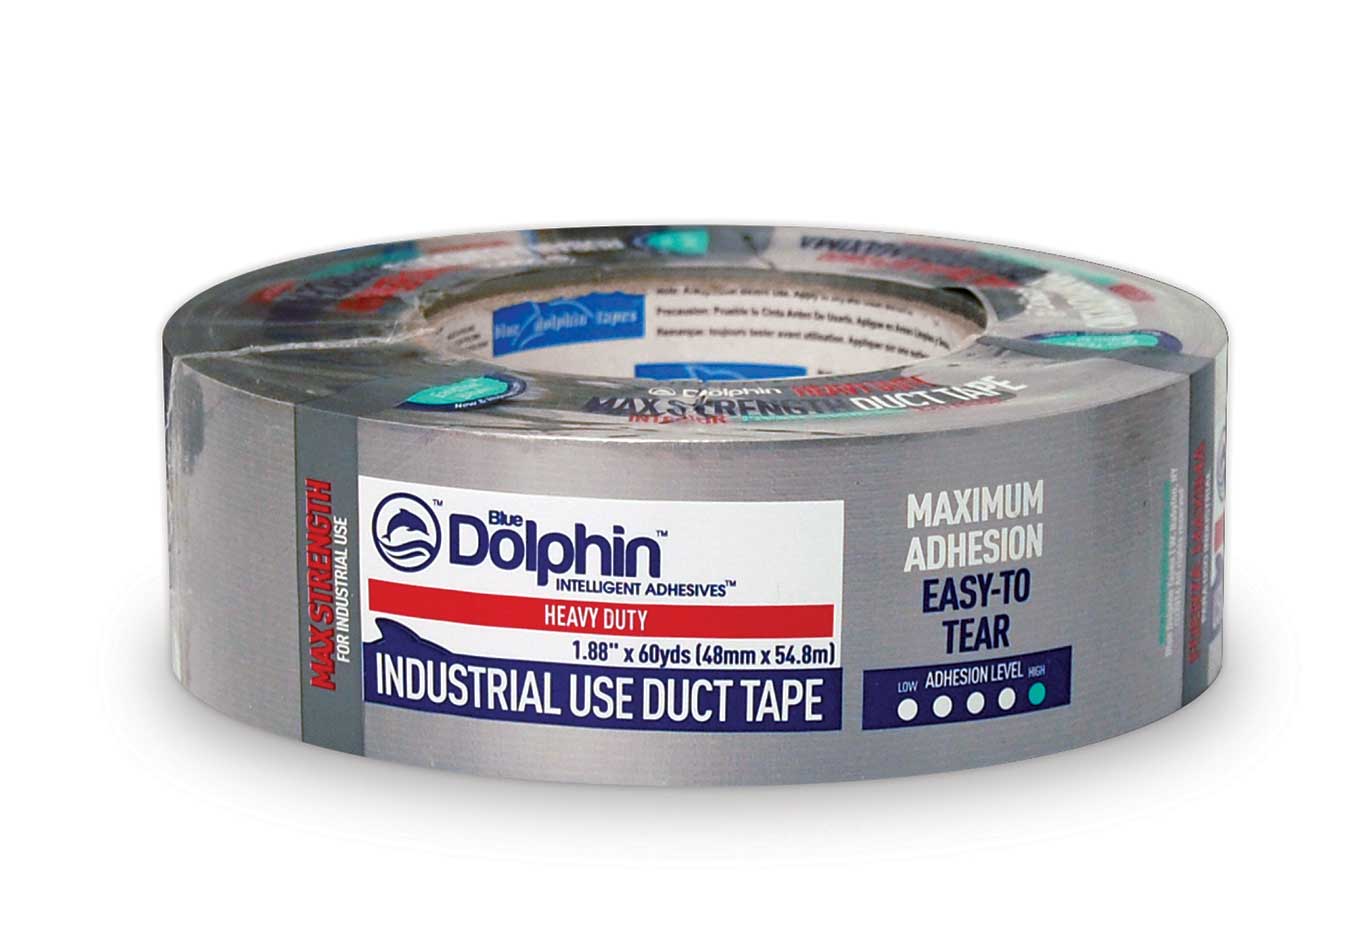 Uses for Duct Tape